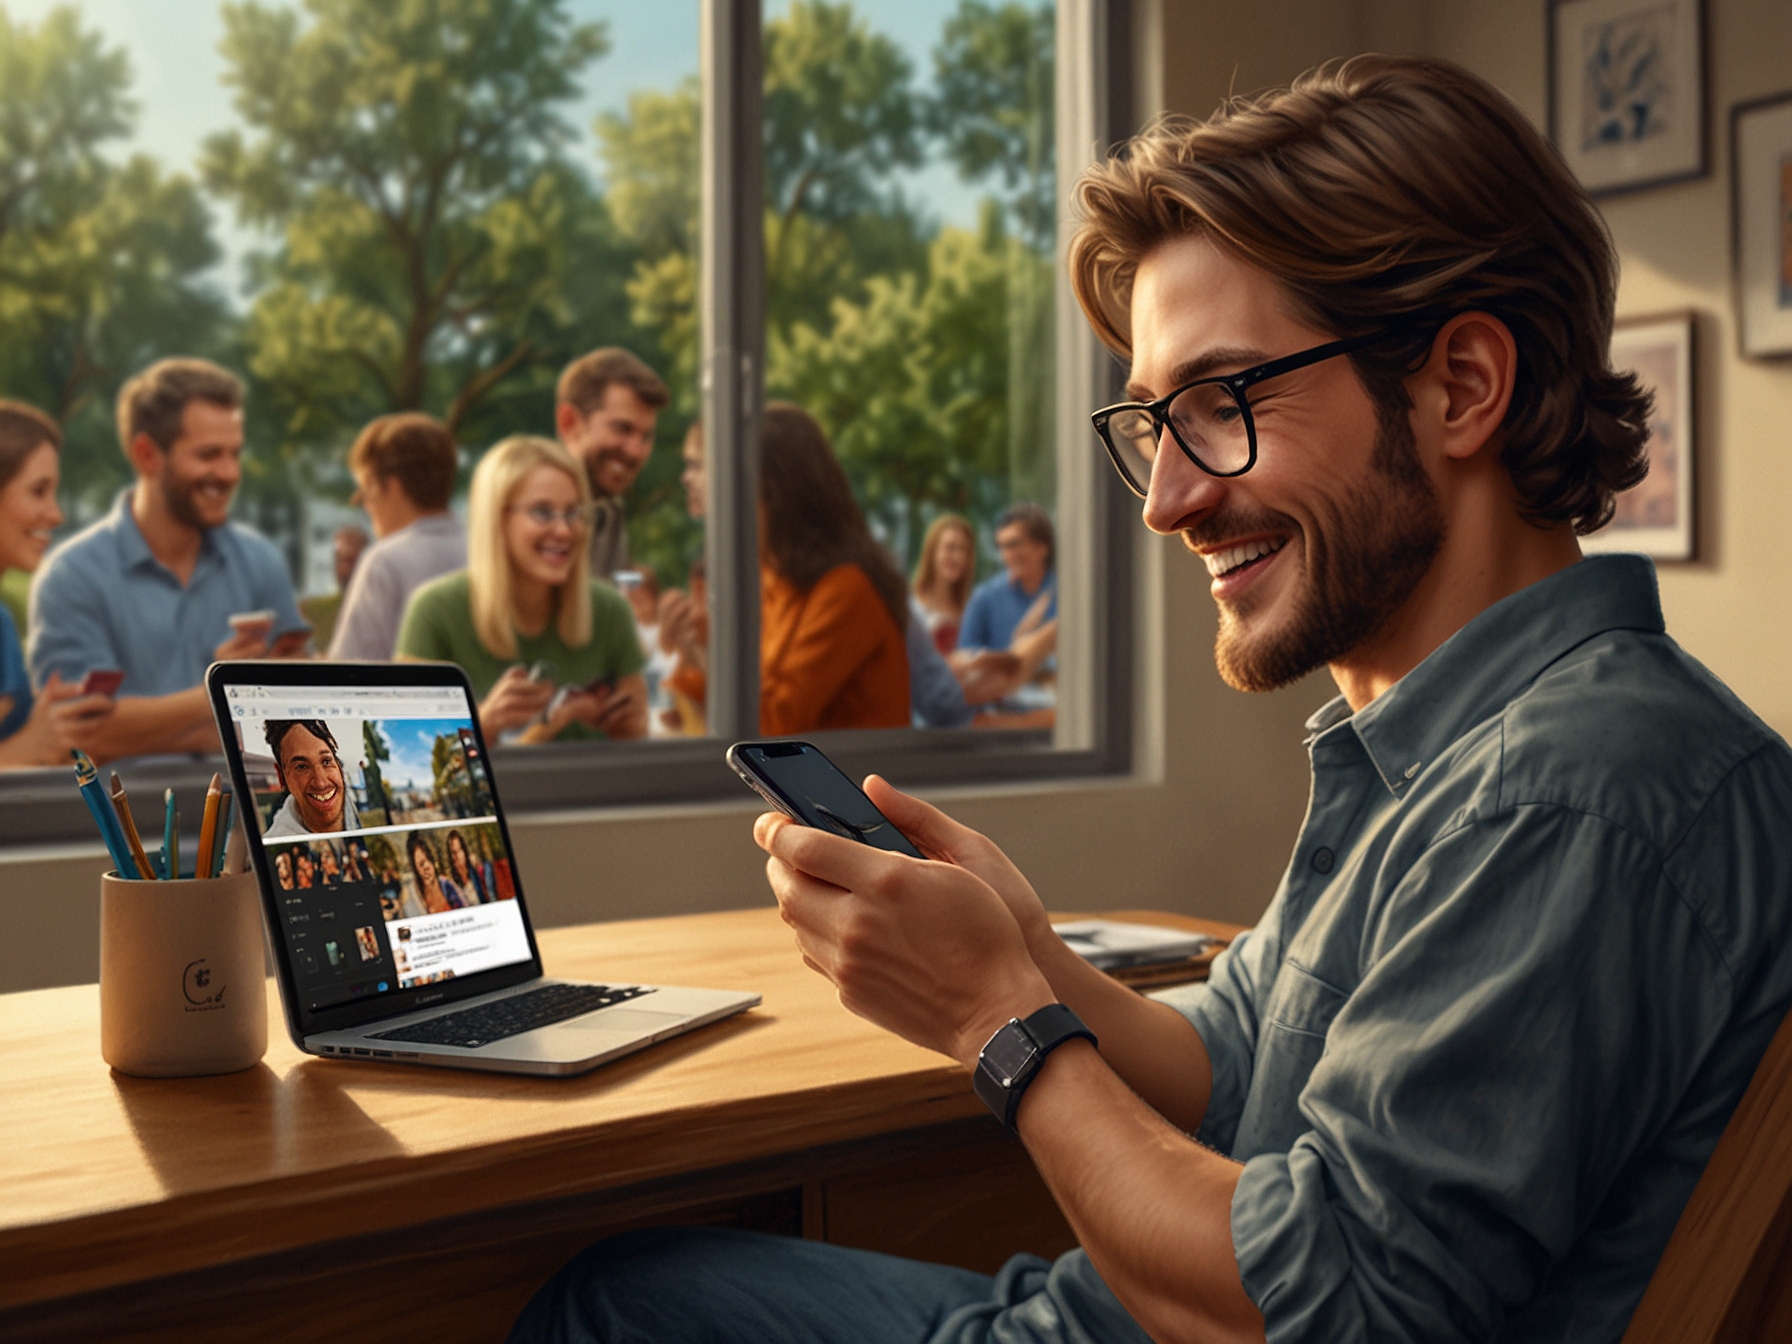 An Apple enthusiast happily using the latest iOS 18 beta version on their iPhone, showcasing the new advanced organizational tools and enhanced FaceTime features.